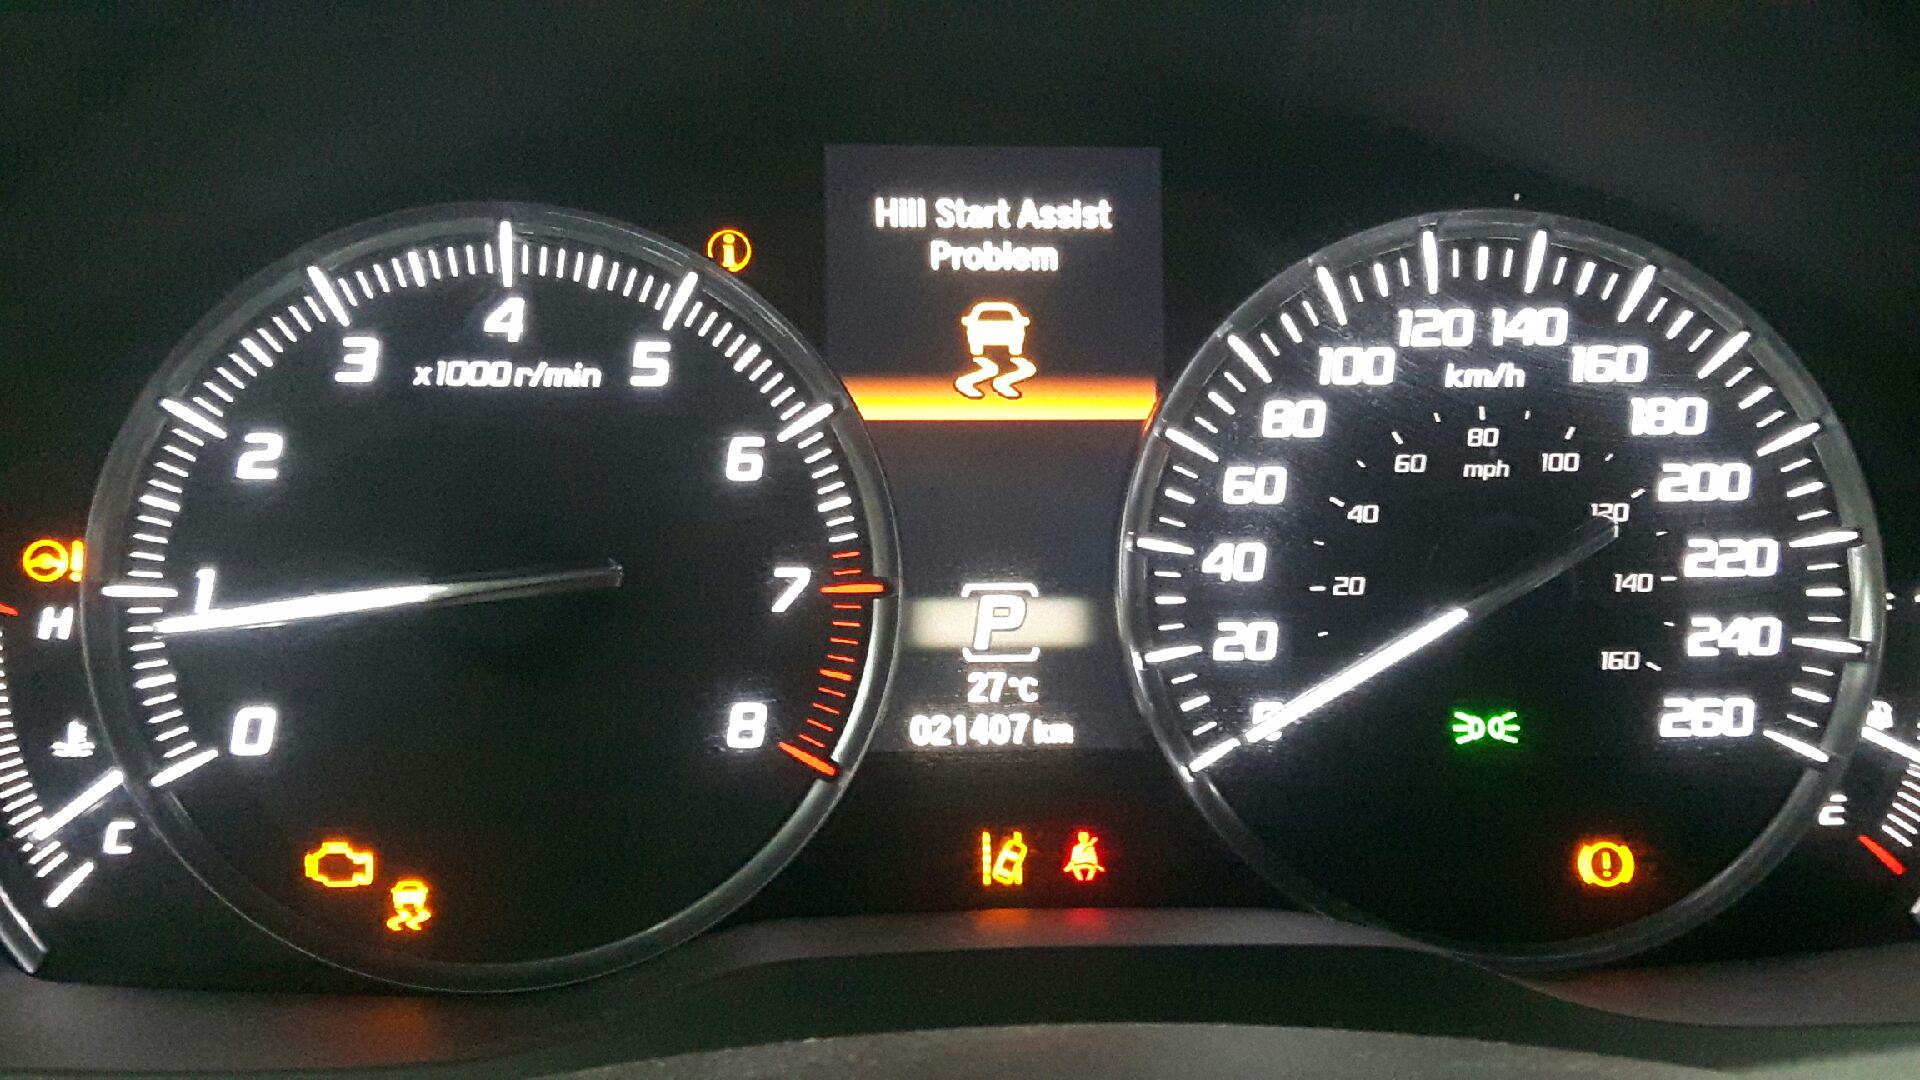 2016 Mdx Tech Shawd All Warning Light Come On Acurazine Acura Enthusiast Community